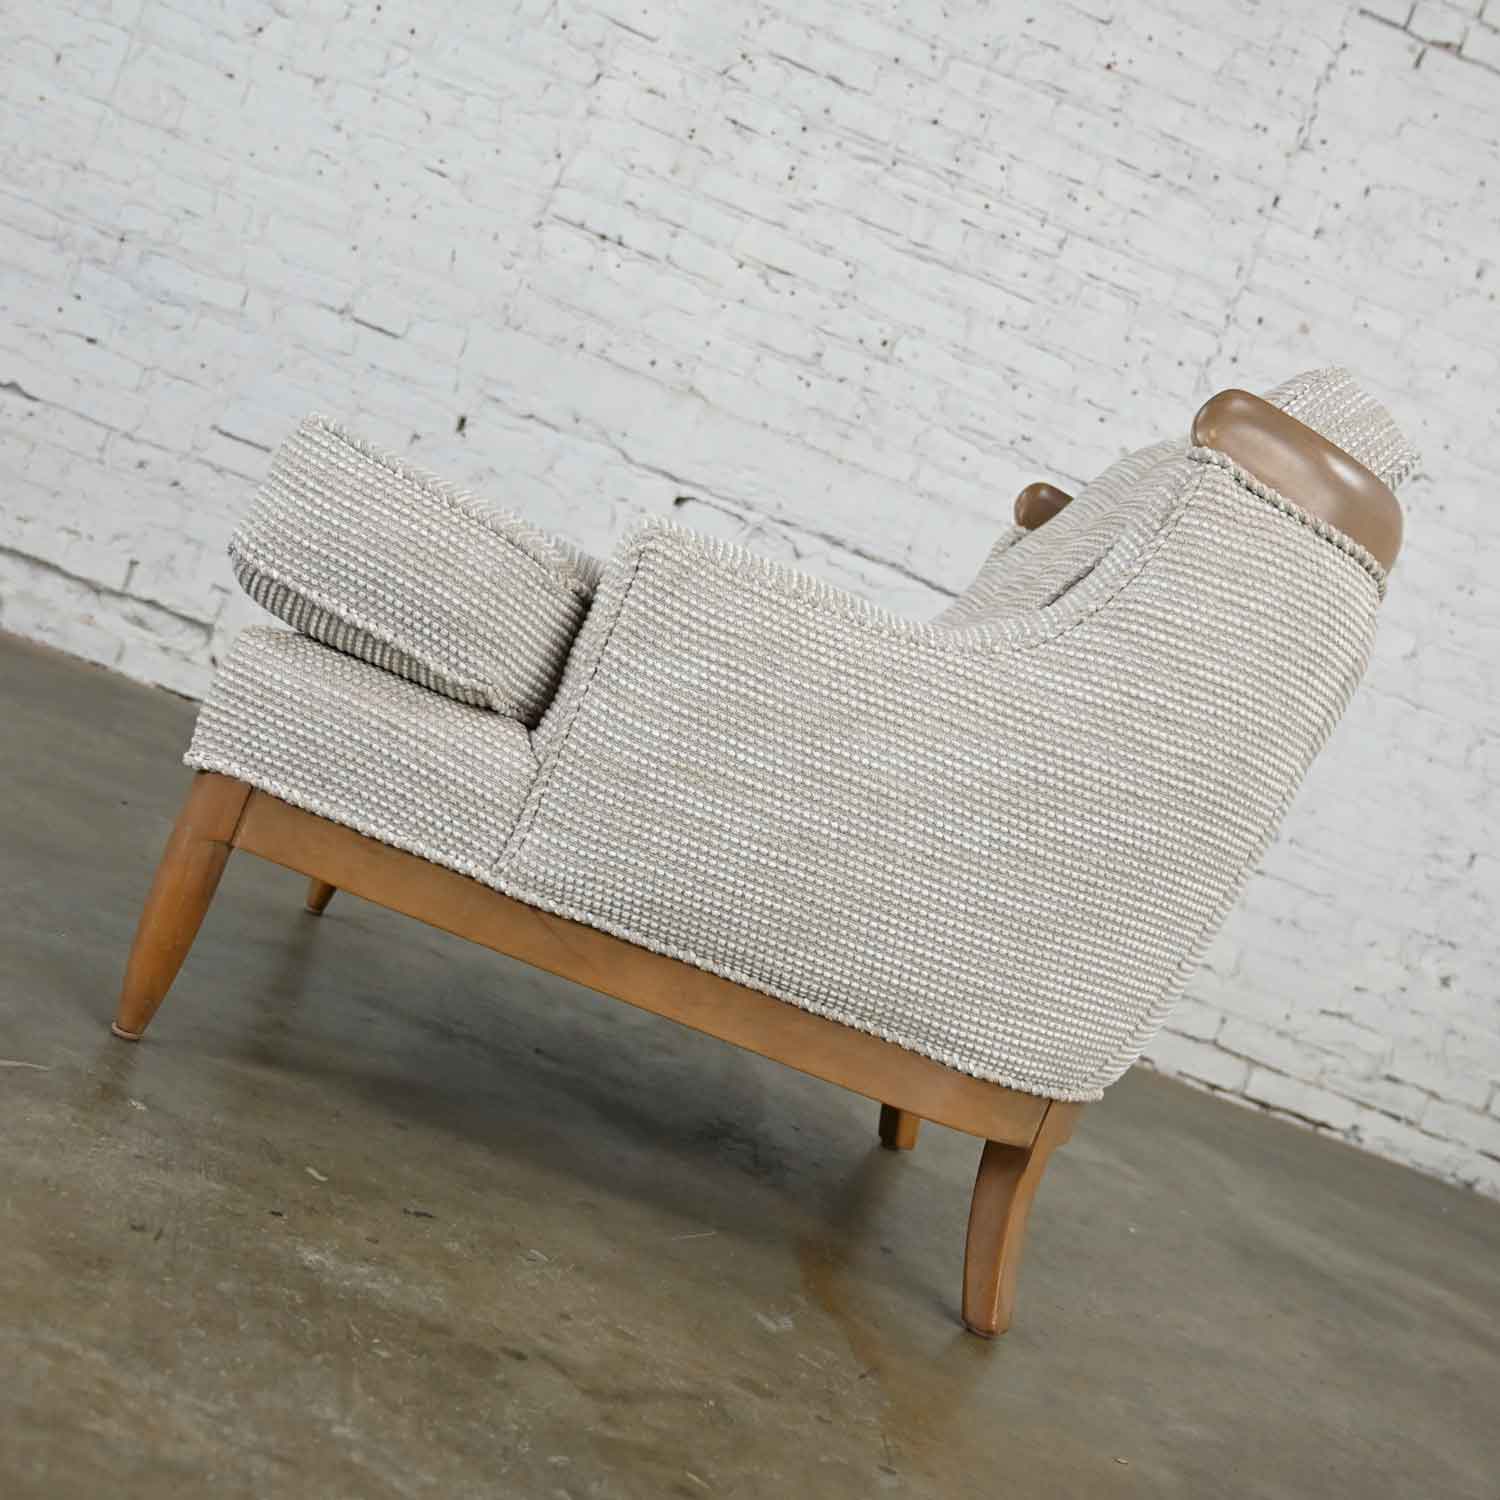 Vintage Lounge Club Chair Attributed to Erwin Lambeth’s Sophisticate with Italian Fabric by Osborne Little